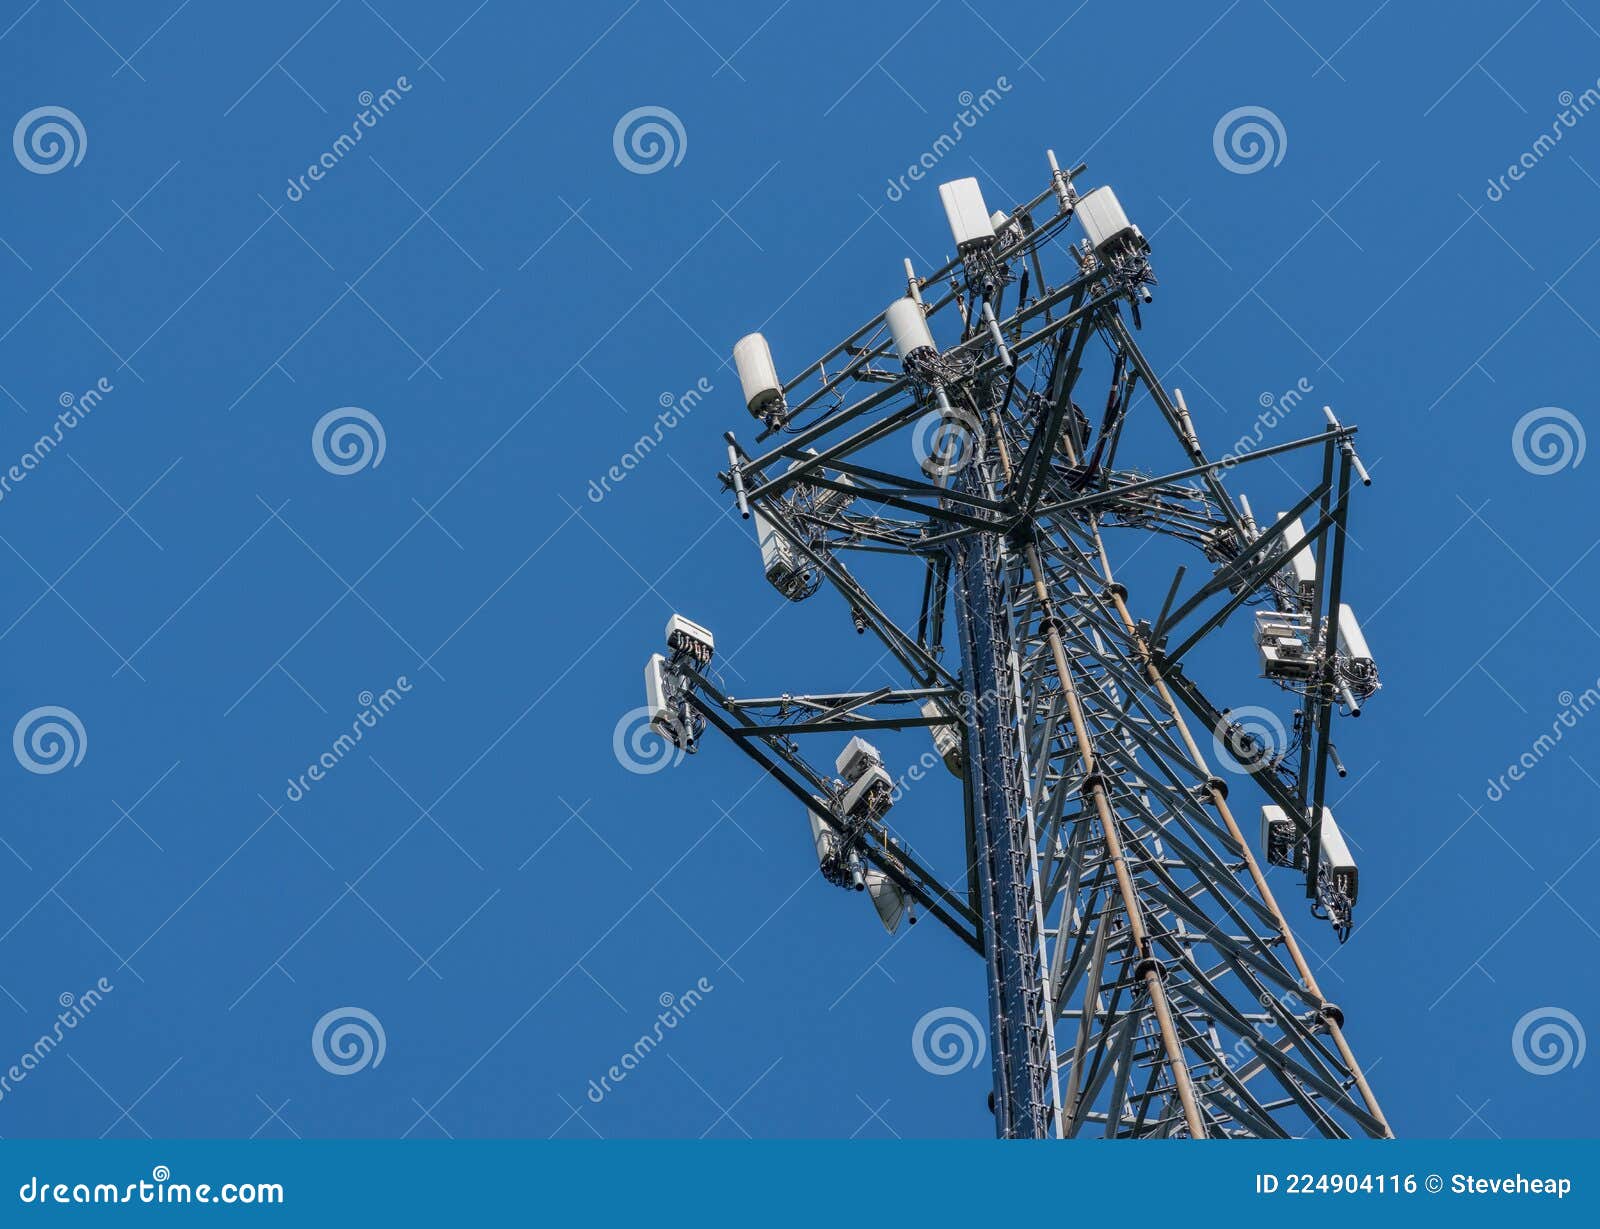 cell phone or mobile service tower providing broadband internet service against blue sky